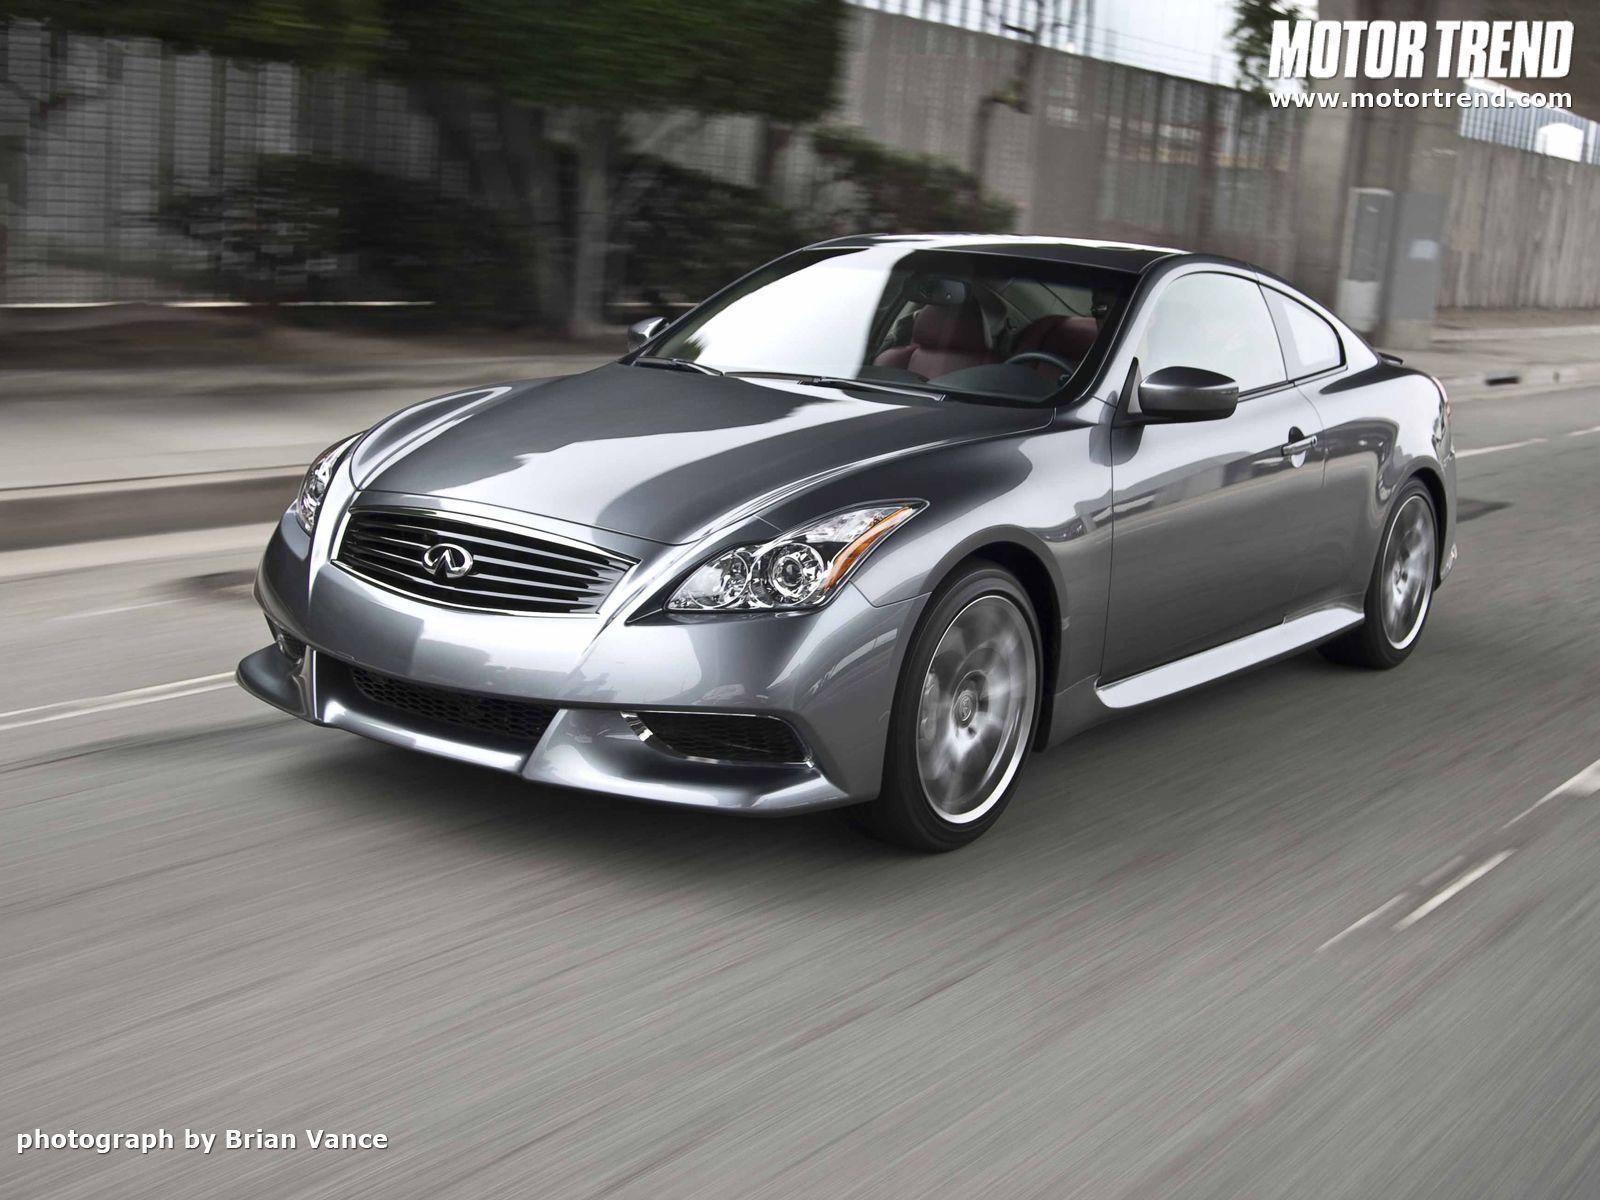 Cadillac CTS Coupe vs 2010 Infiniti G37 Coupe Wallpaper